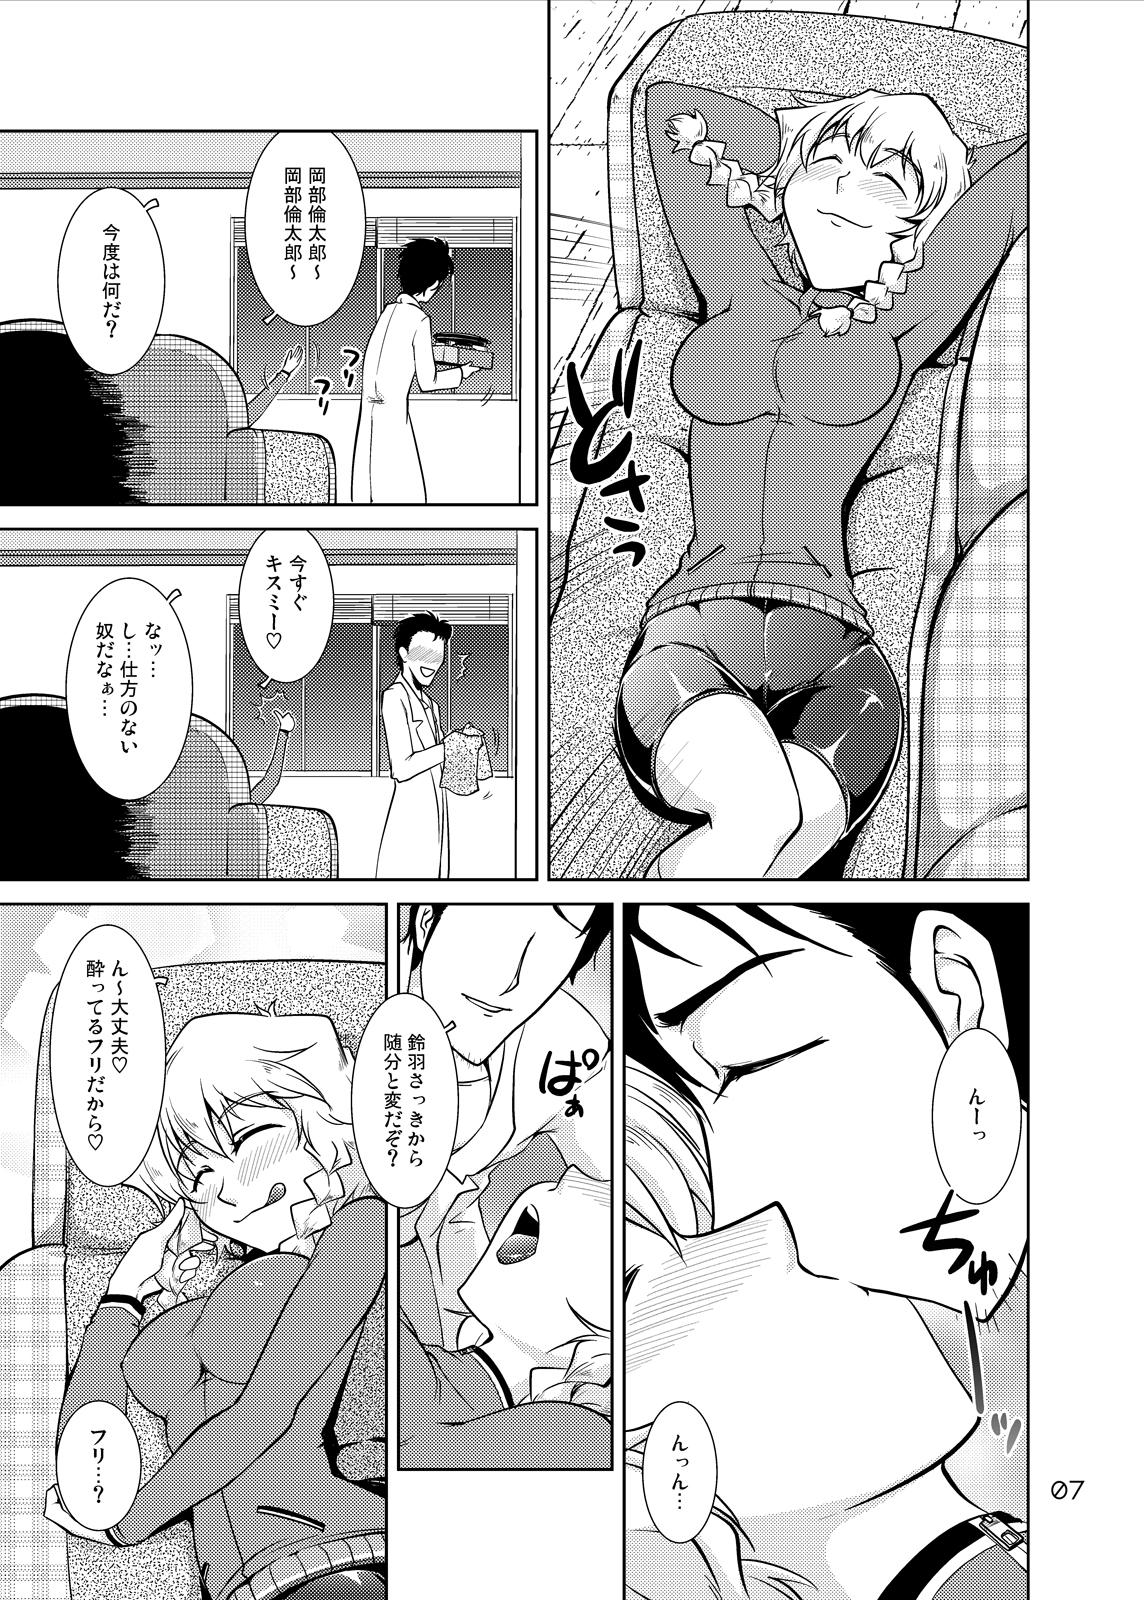 Master Spats;Gate PART6 Pokon's Fatality - Steinsgate Horny Sluts - Page 6